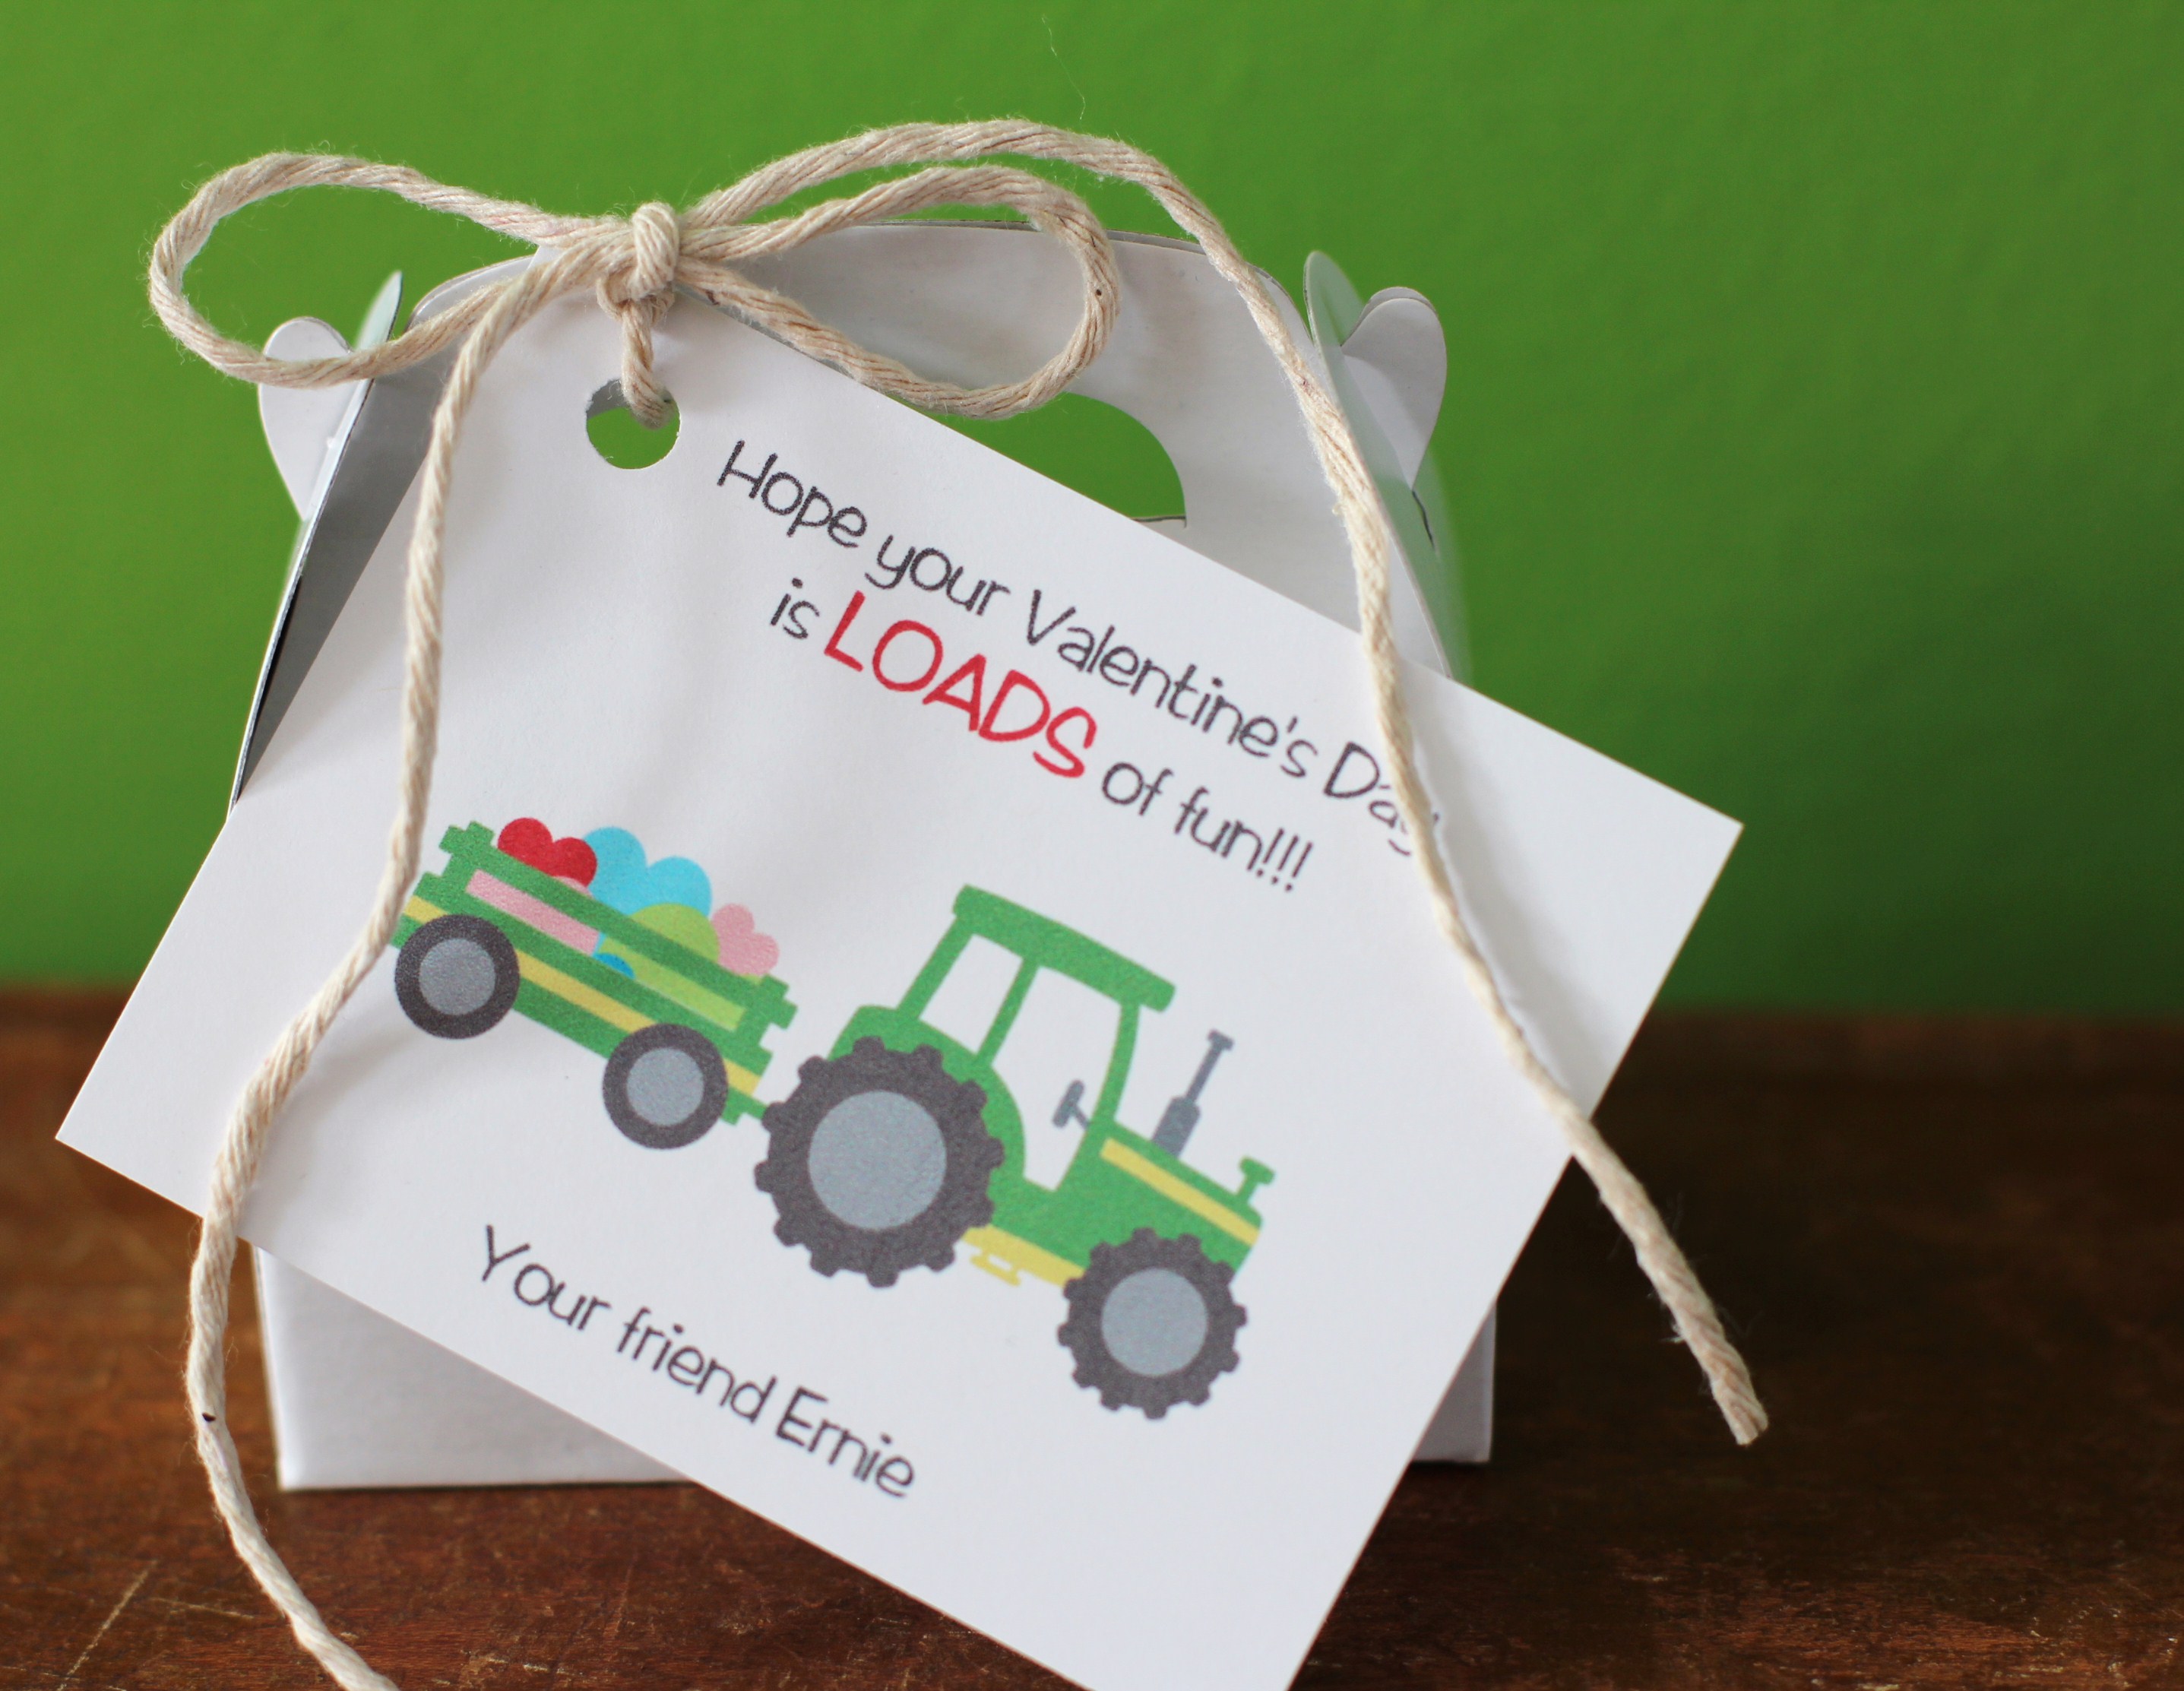 A day filled with love…or mostly tractors